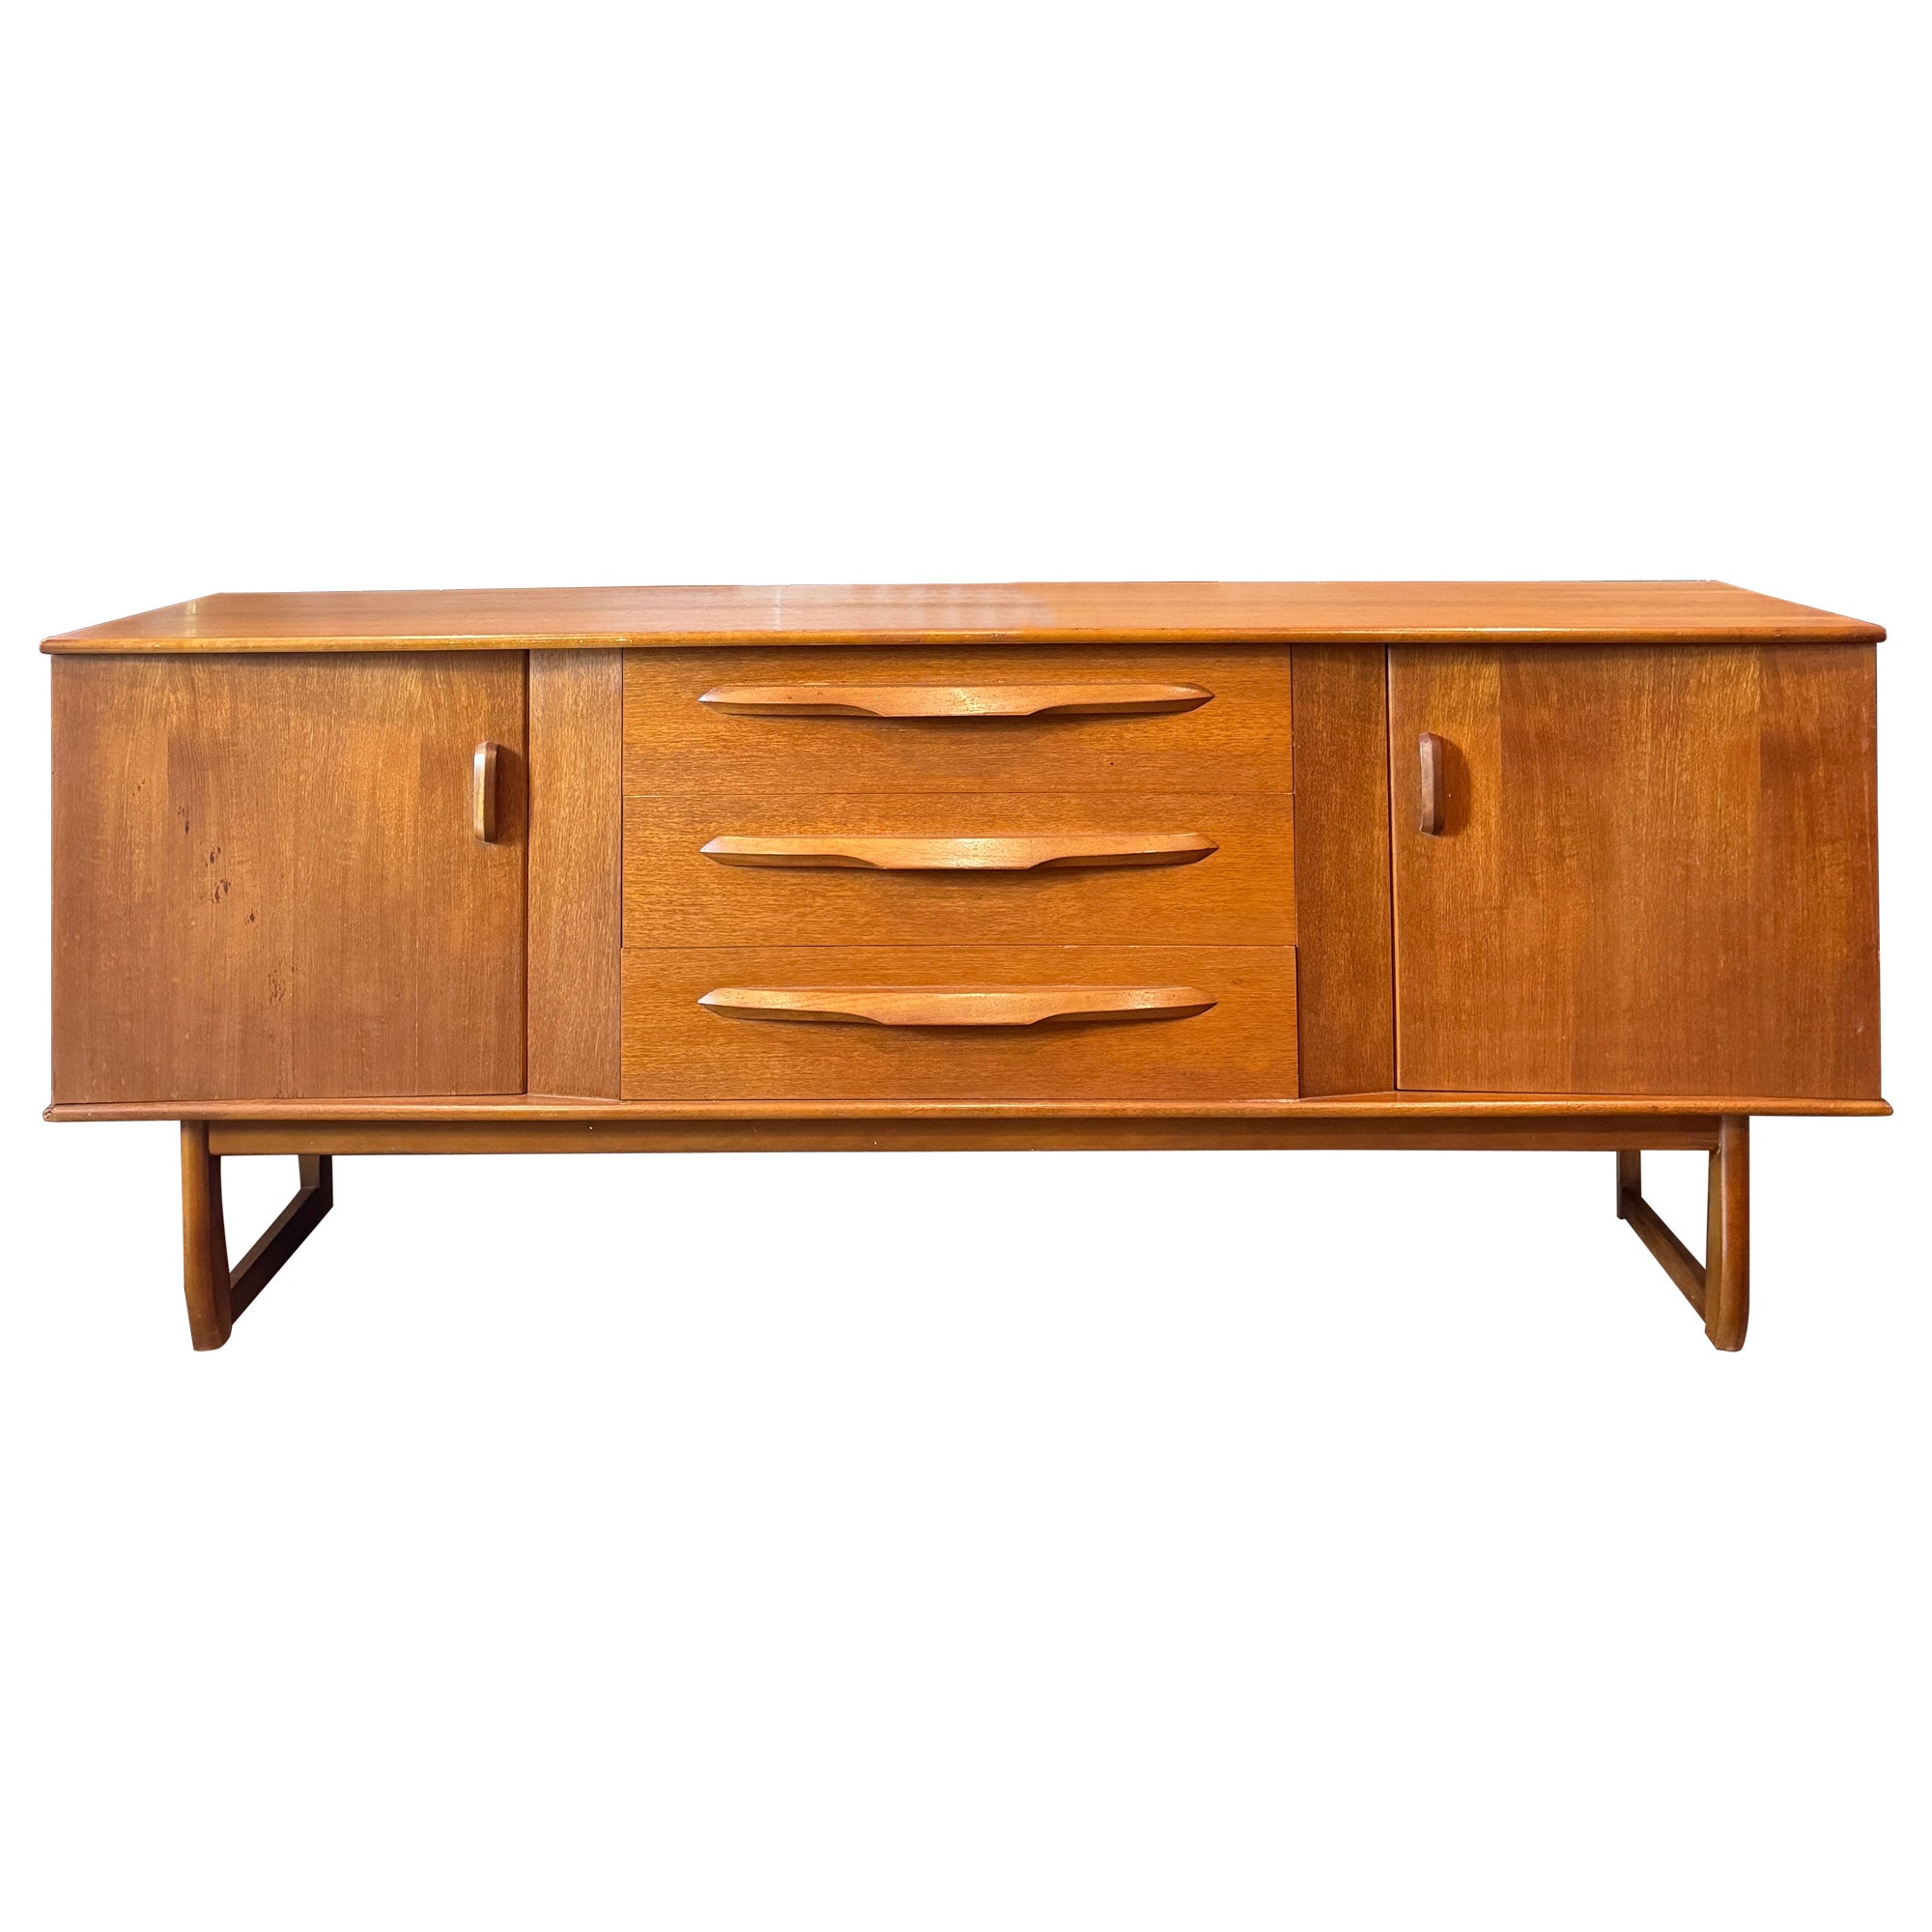 Unique mid century modern sideboard manufactured in UK, circa 1960s For Sale